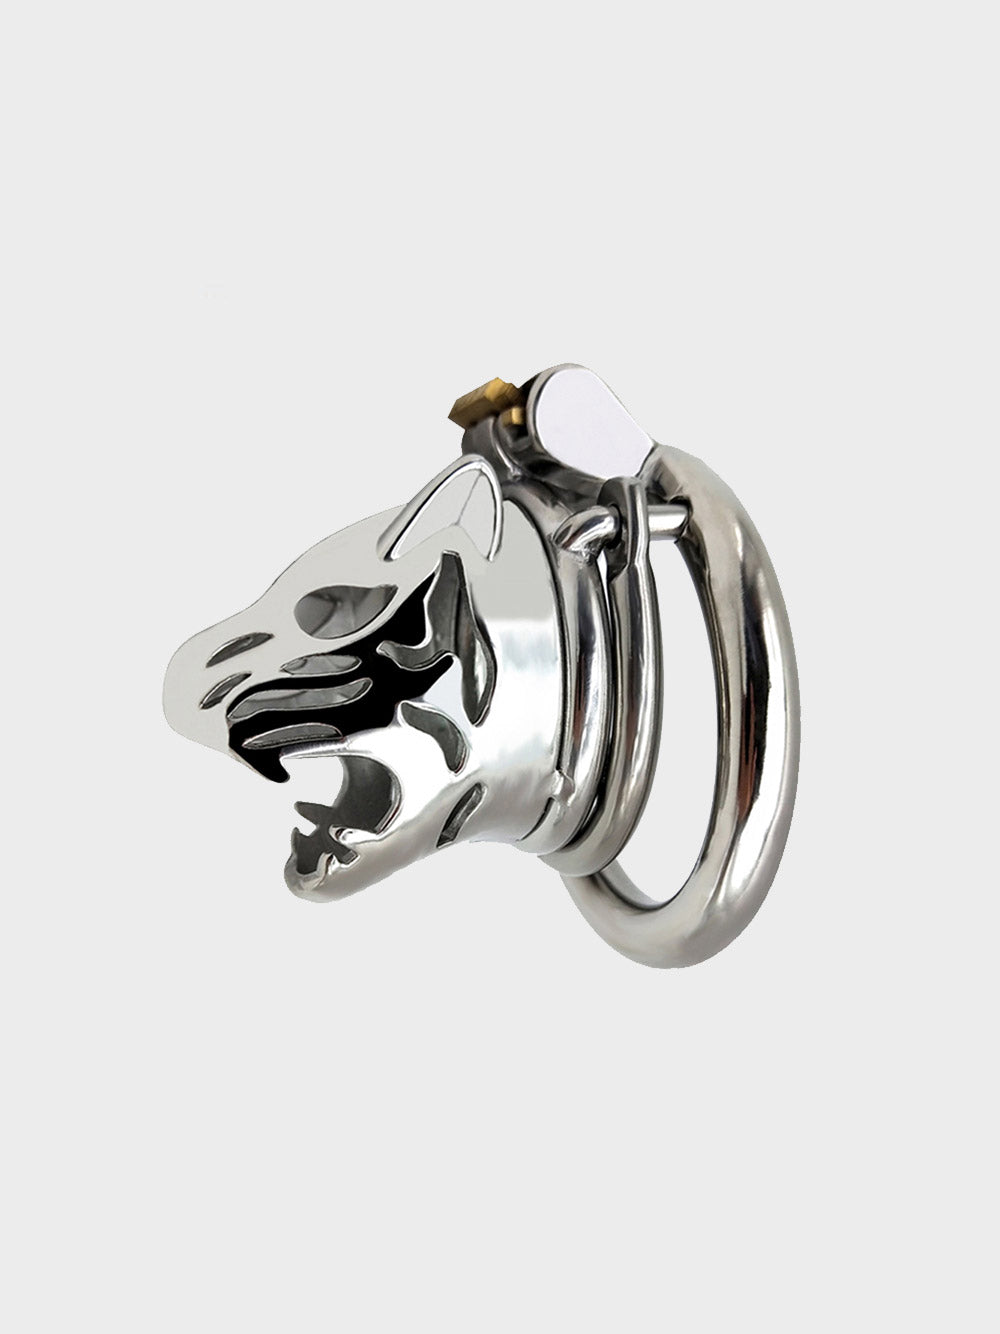 Chastity cage in the shape of a tigers head made of steel